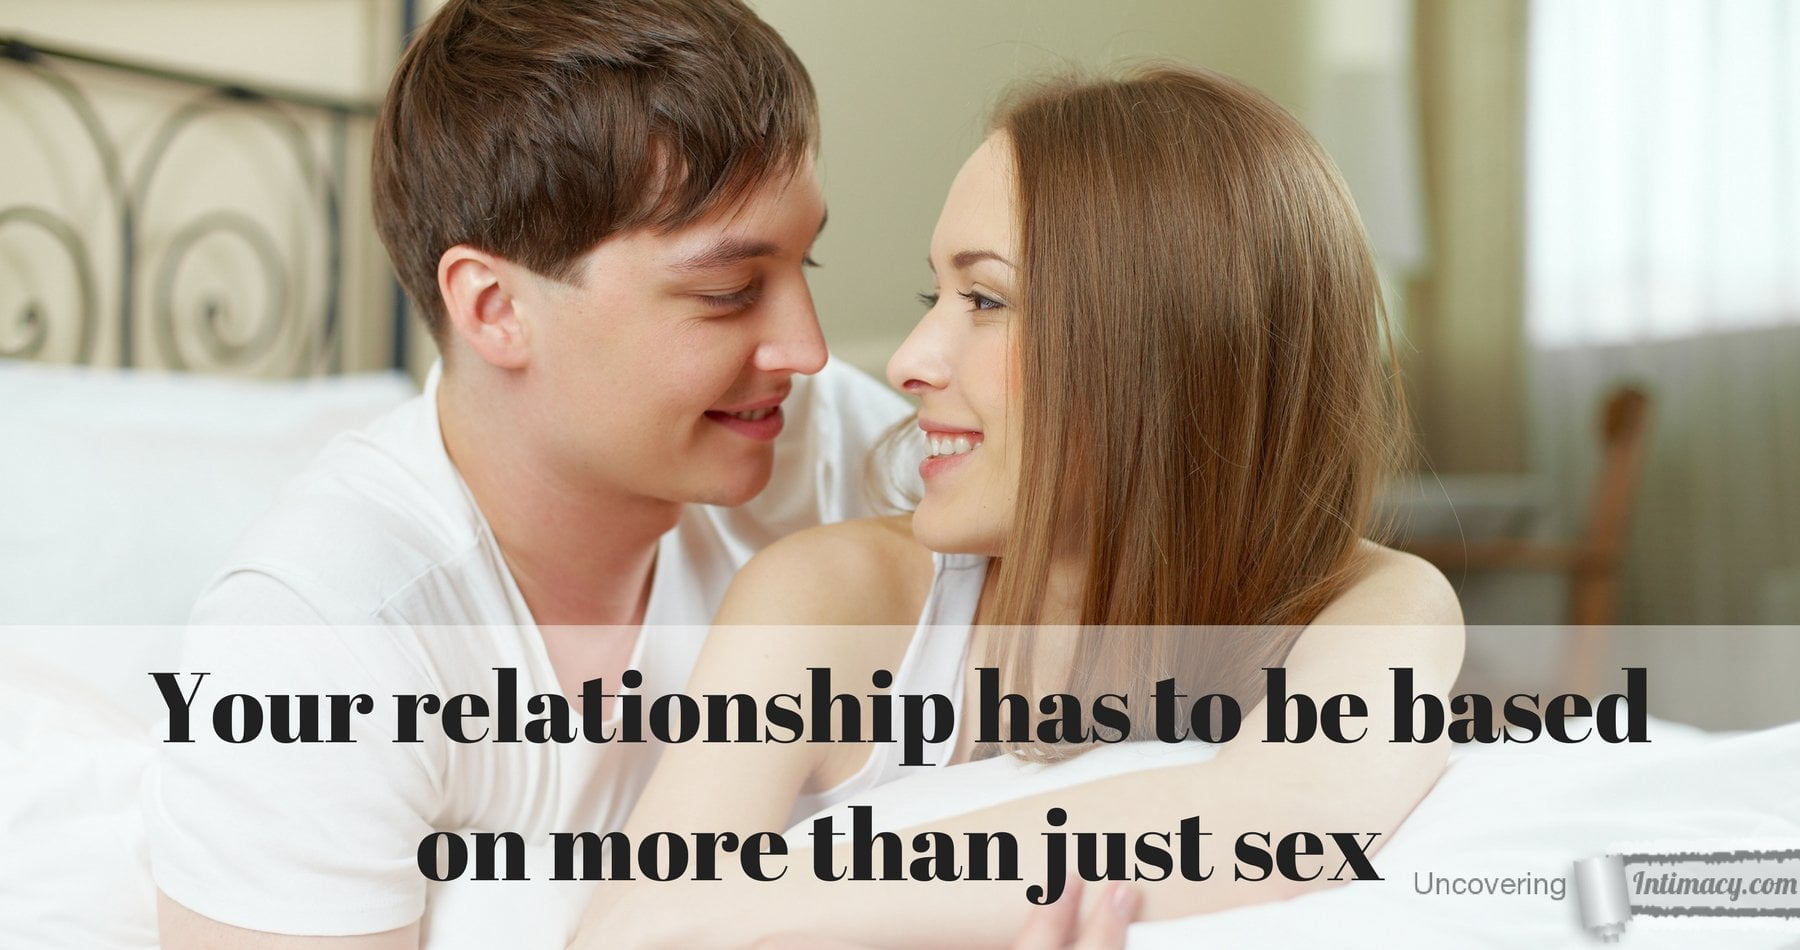 Your relationship has to be based on more than just